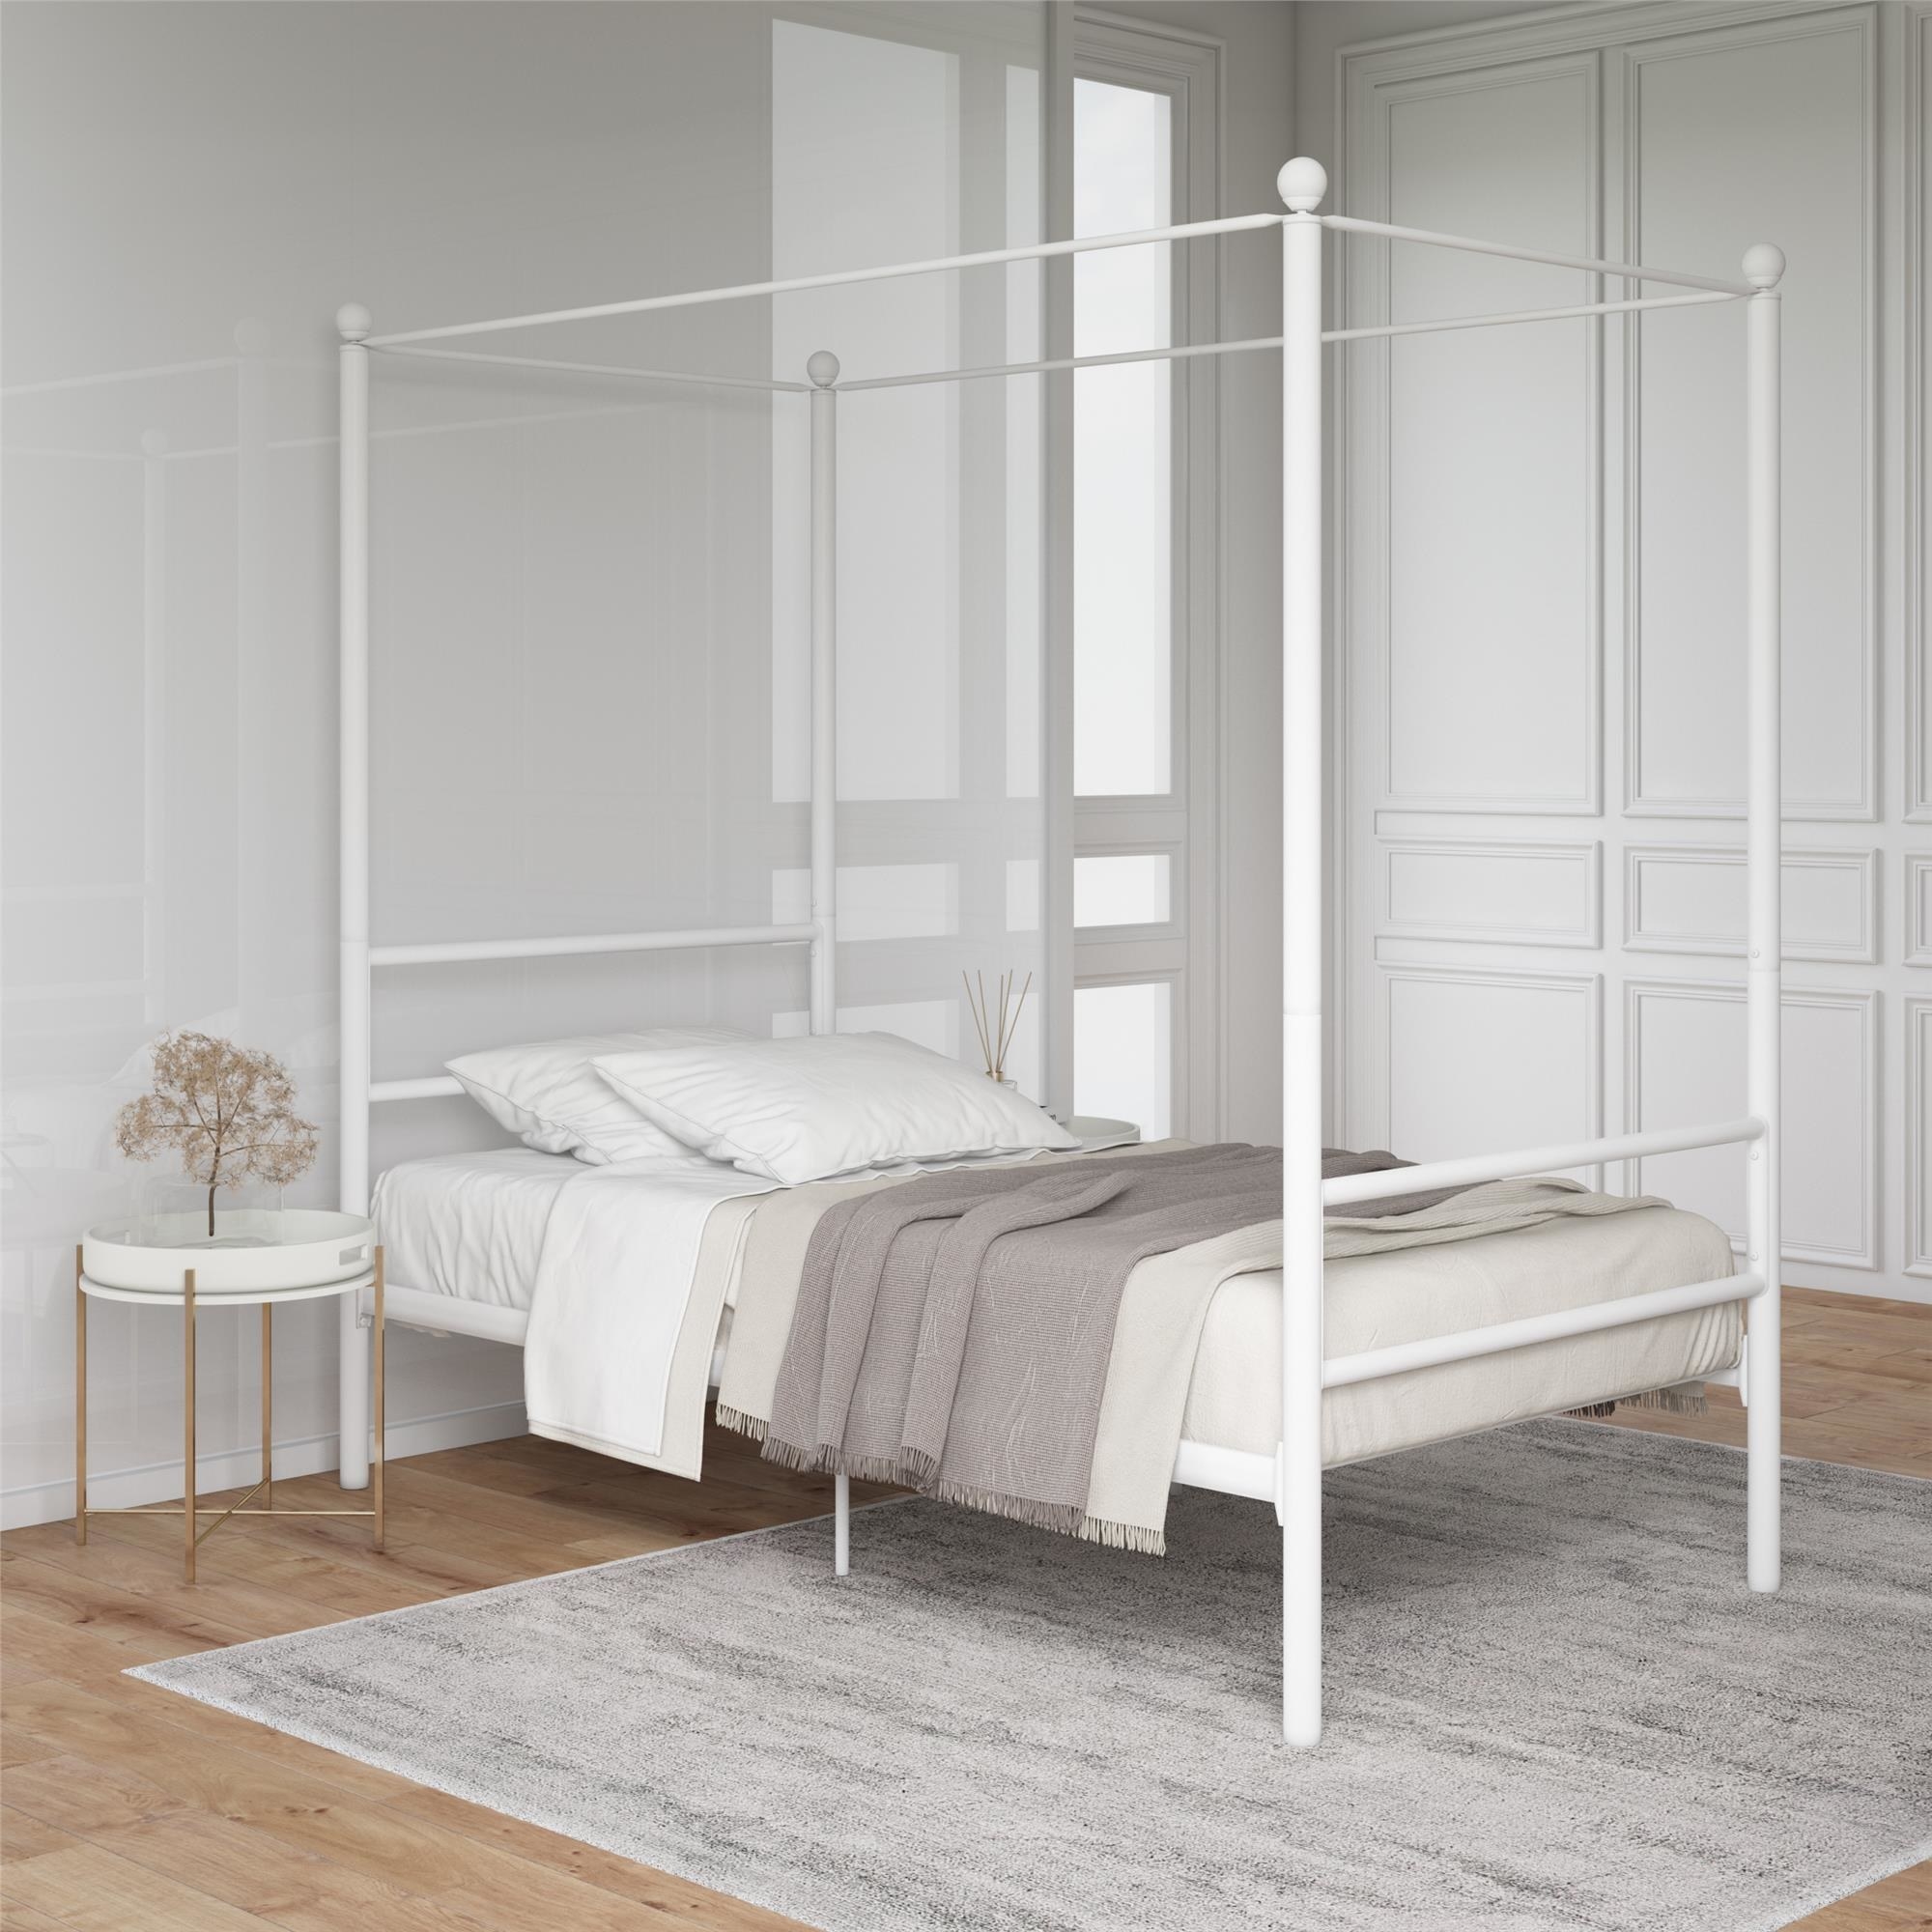 The canopy bed frame in white